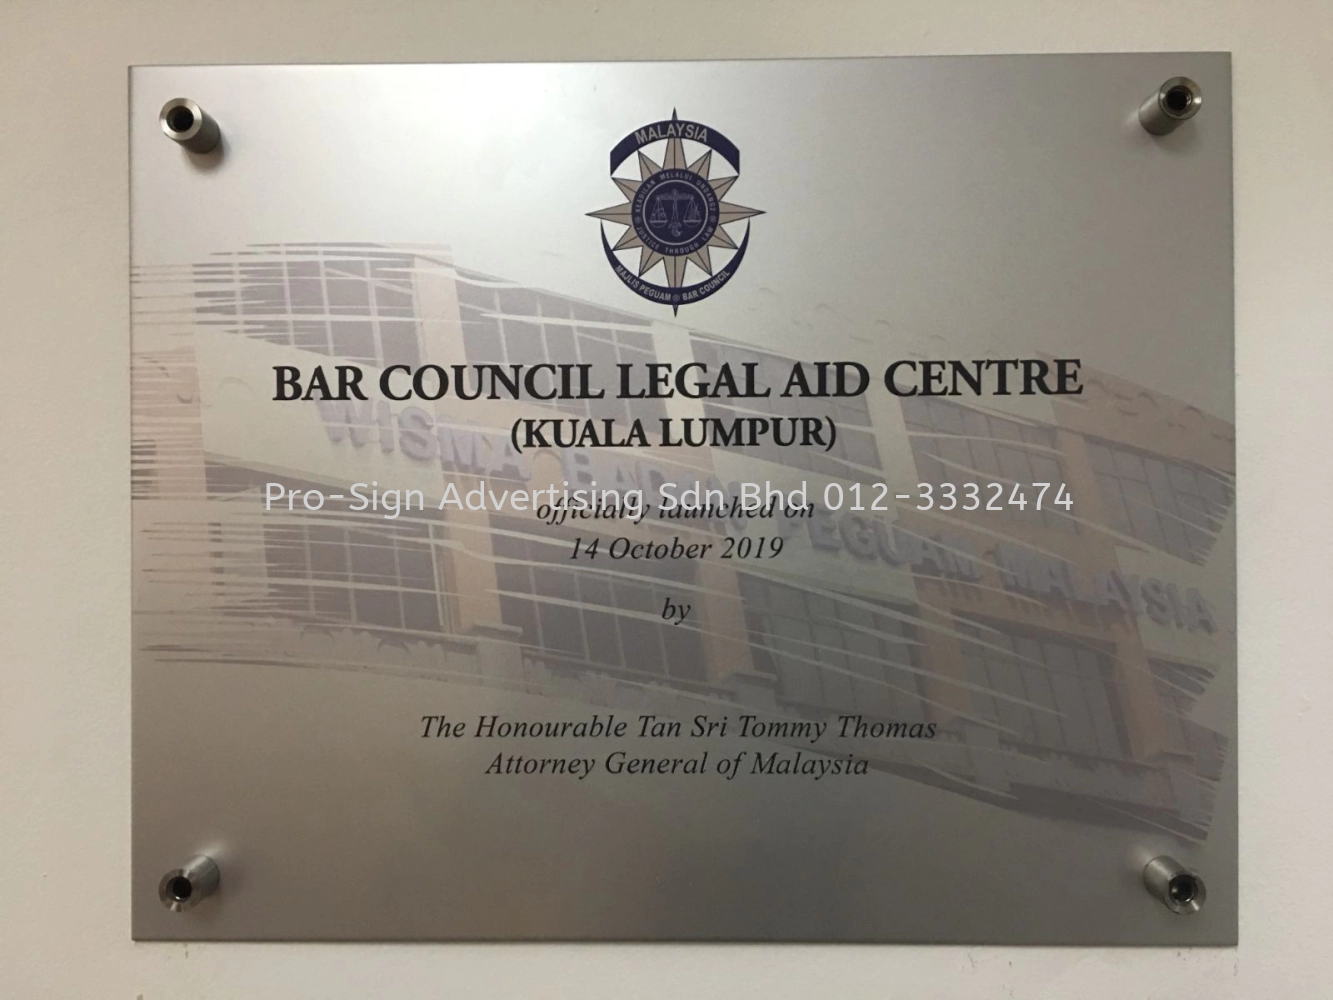 UV DIRECT PRINT ON SILVER METAL PLATE (LEGAL AID CENTRE, KL, 2019)